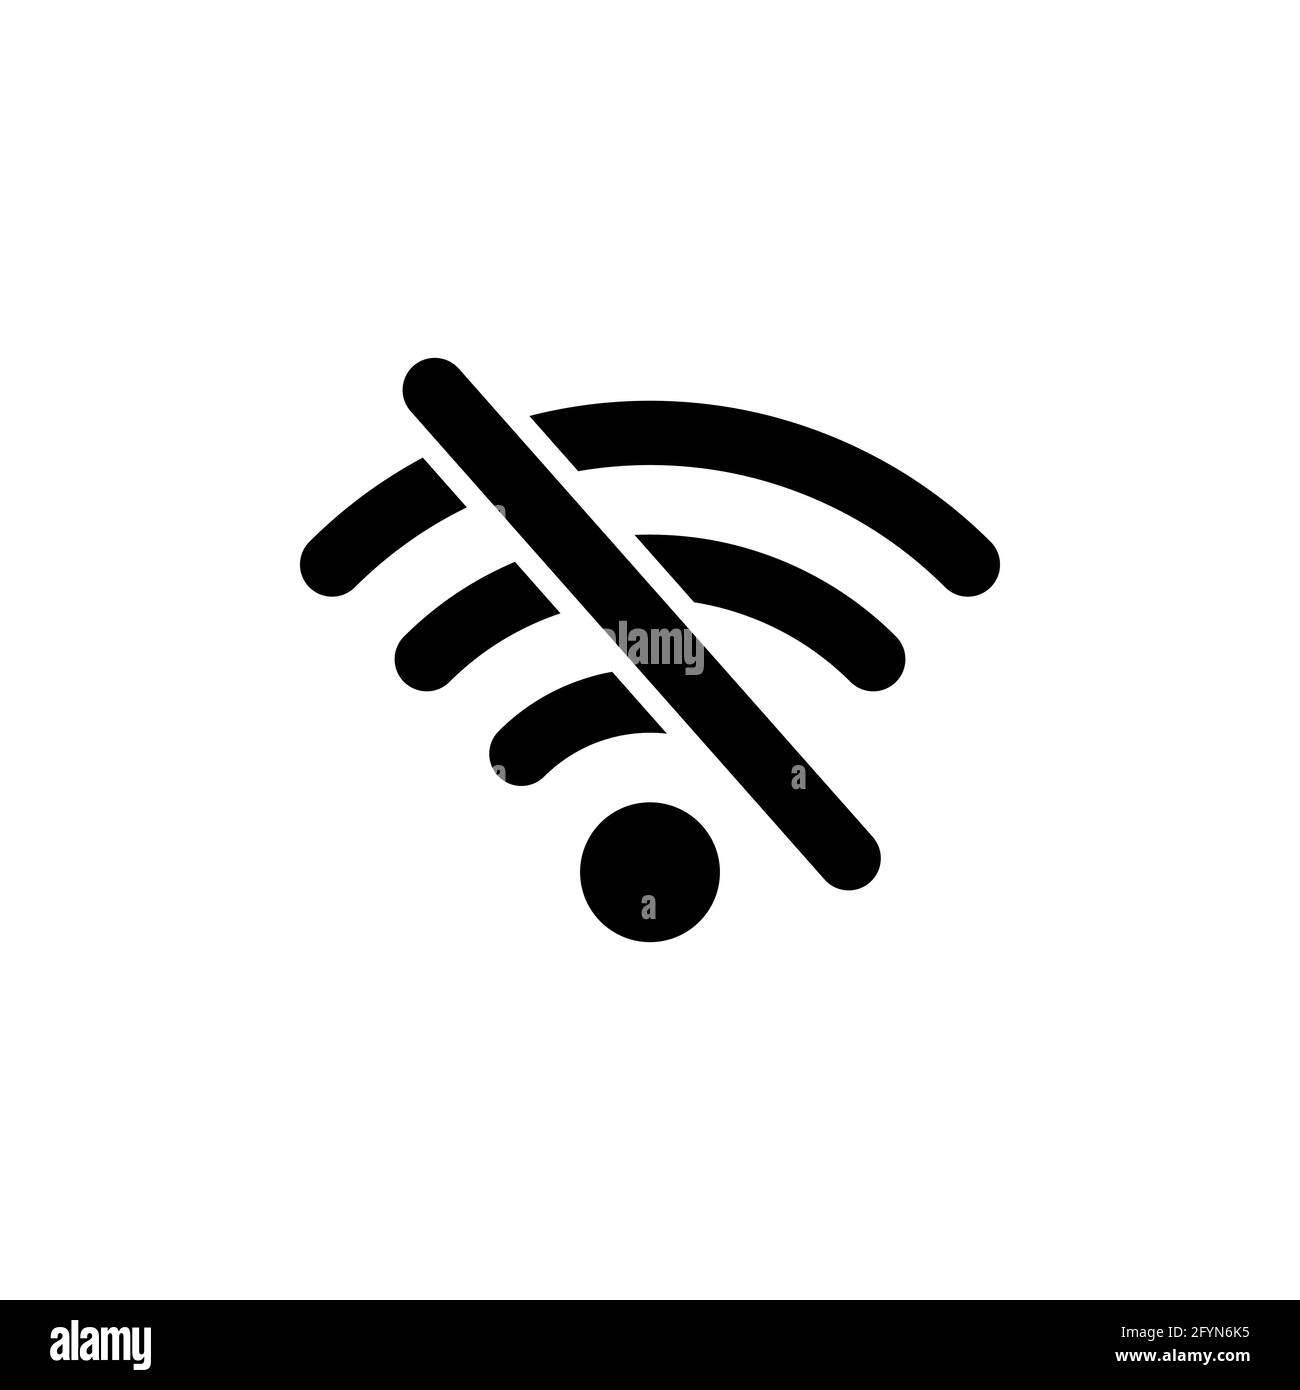 Offline wifi icon. Disconnected wireless network pictogram. No signal. Wireless technology symbol. Stock Vector